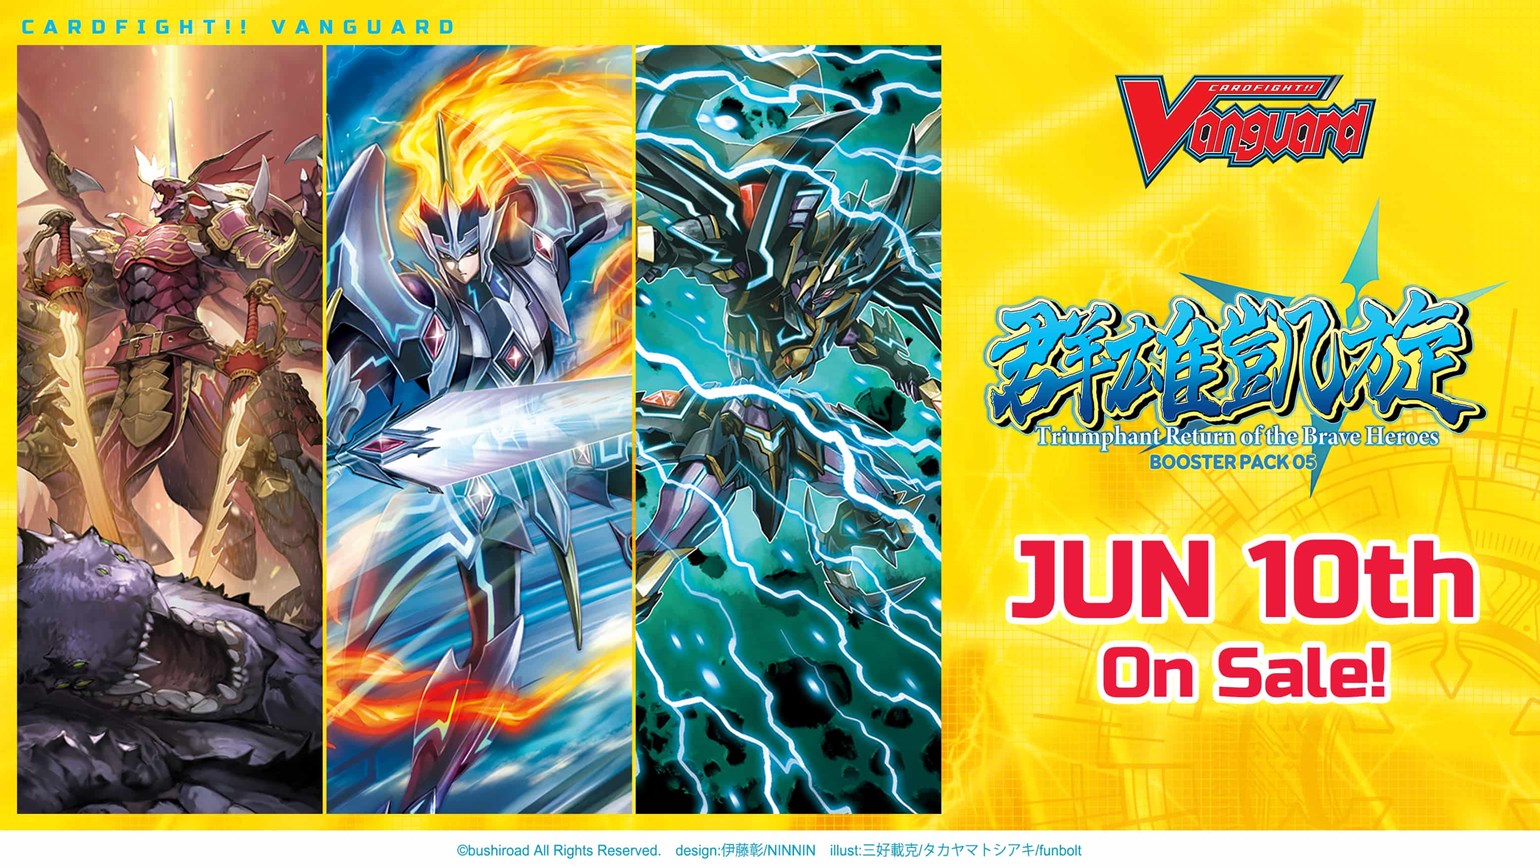 The Heroes Make Their Triumphant Return! New English Edition Cardfight!! Vanguard Booster Pack 05: Triumphant Return of the Brave Heroes, coming to stores on June 10th!